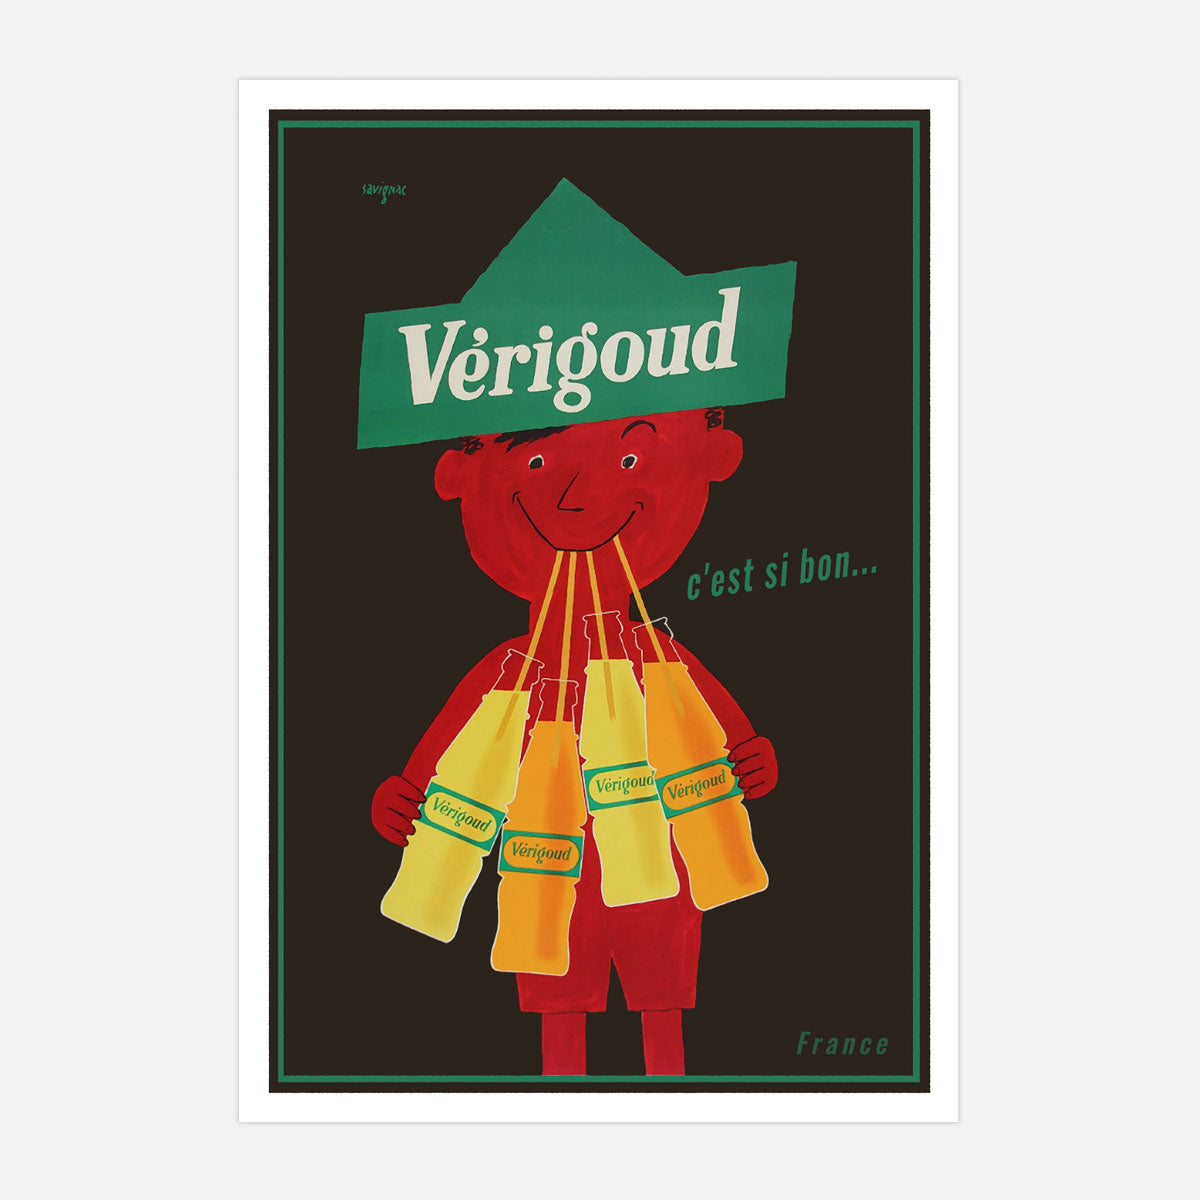 French Verigoud retro vintage advertising print from Places We Luv